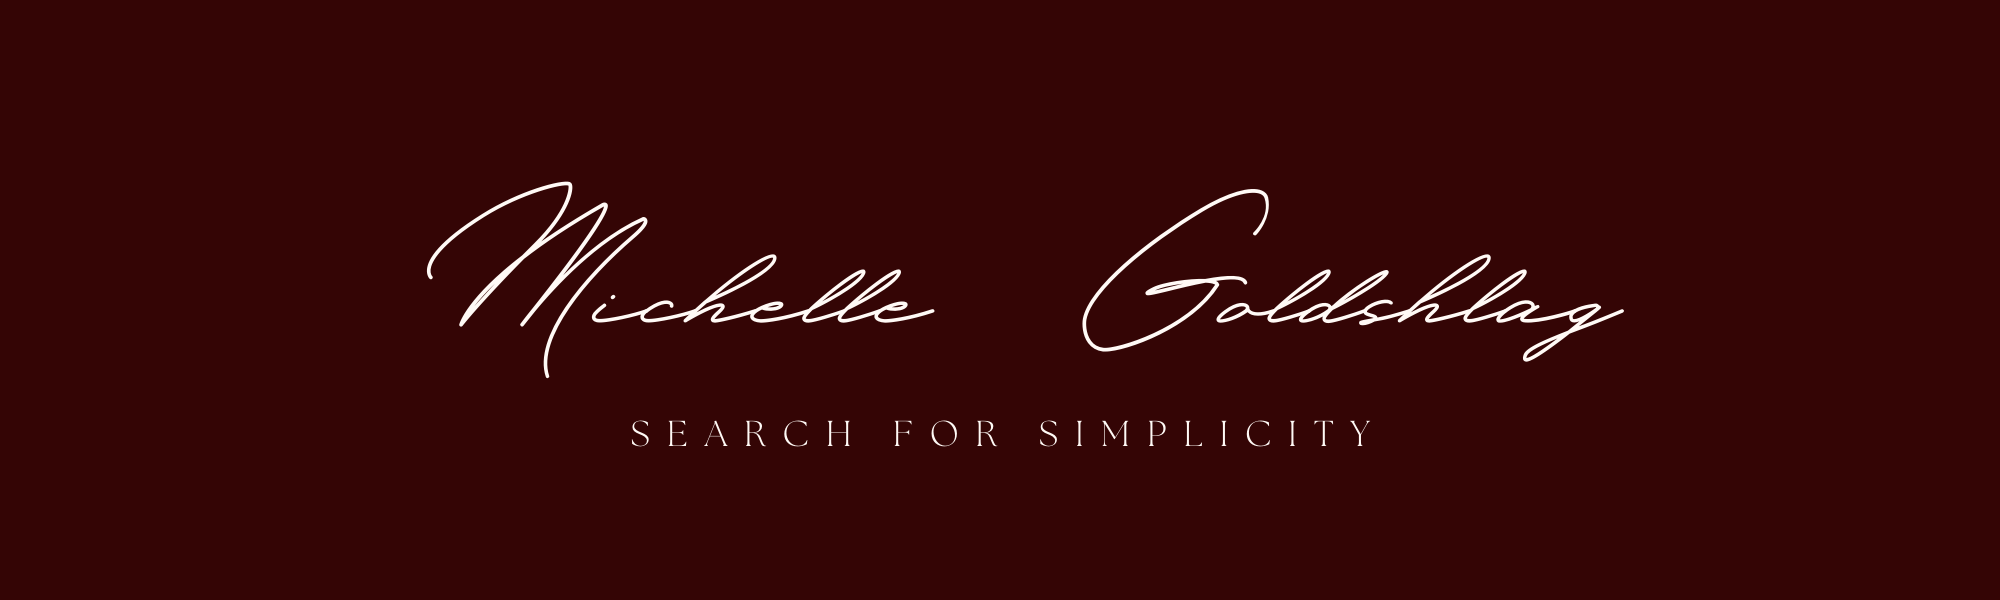 A deep maroon background color with Michelle Goldshlag written in a cursive font and the title, 